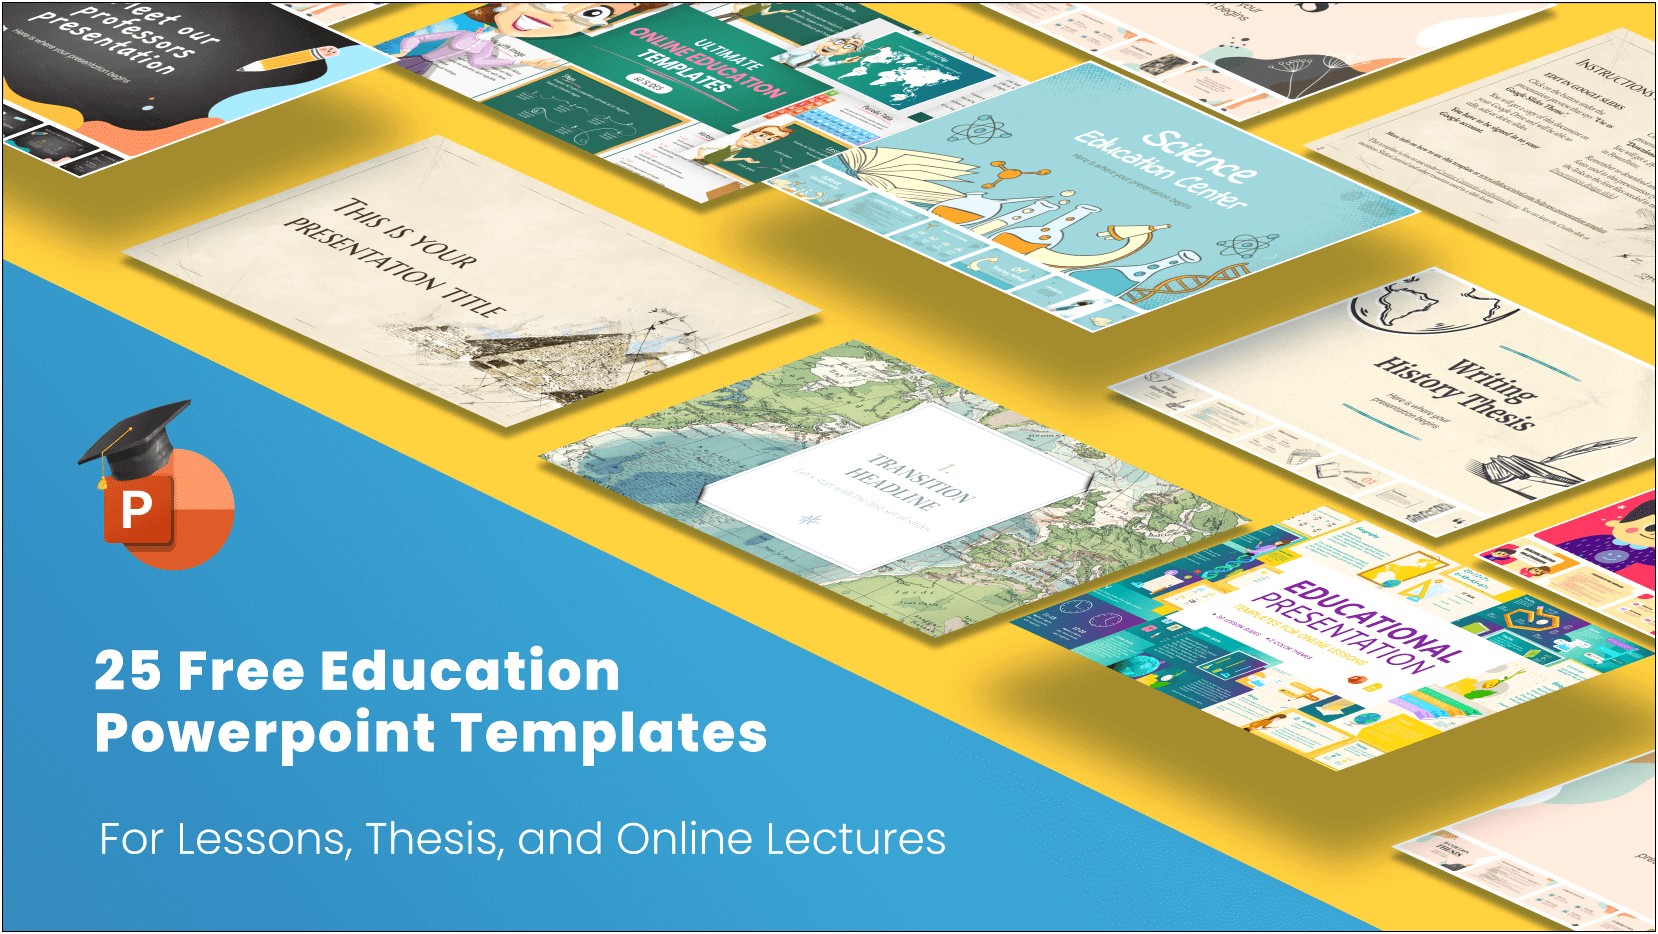 best-education-powerpoint-templates-free-download-templates-resume-designs-e8j7qwavny